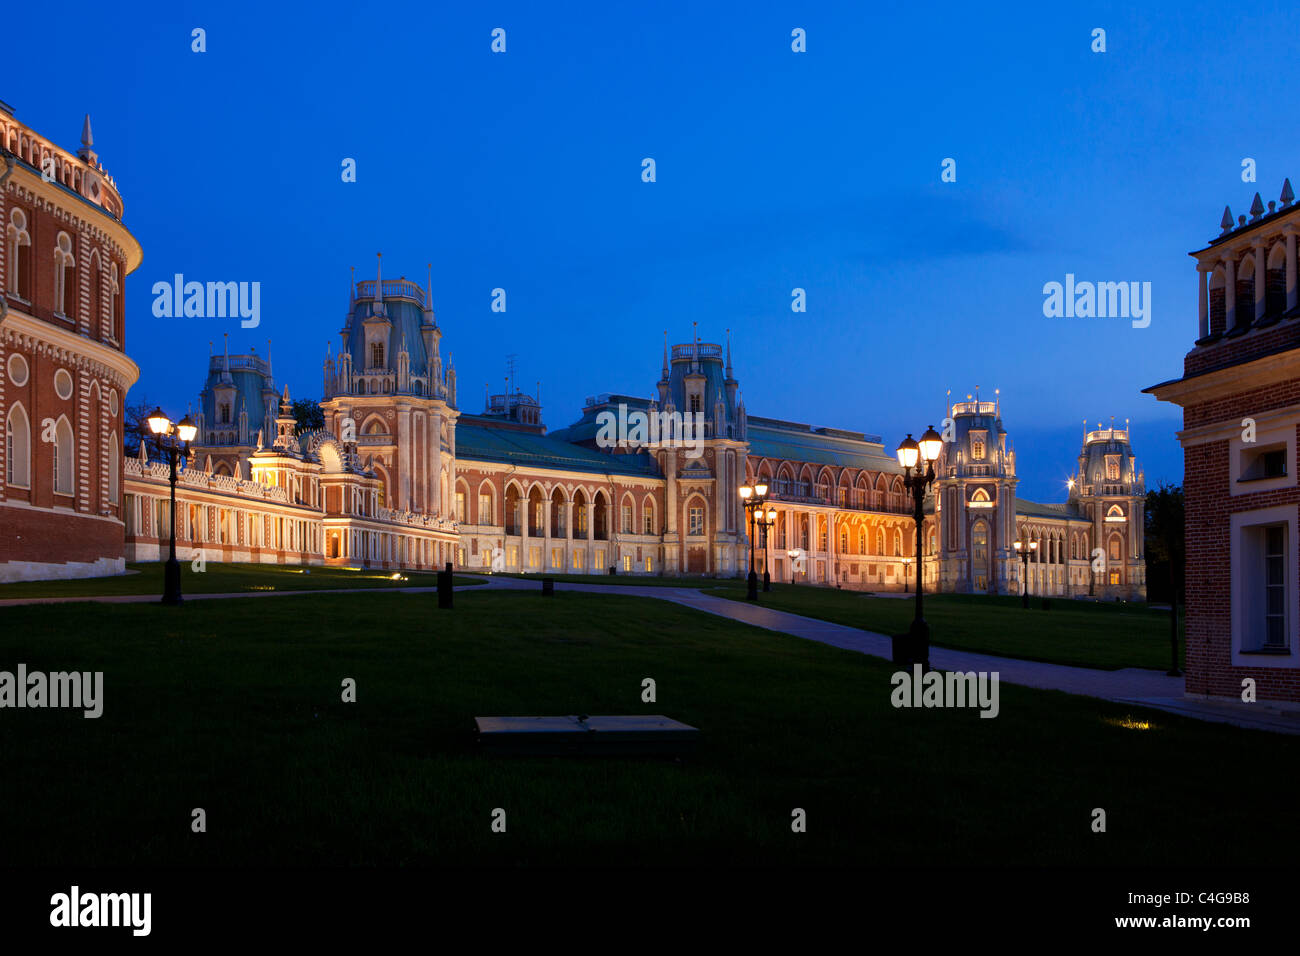 The 18th century Neo-Gothic (Gothic Revival) Tsaritsyno Palace in Moscow, Russia at twilight Stock Photo